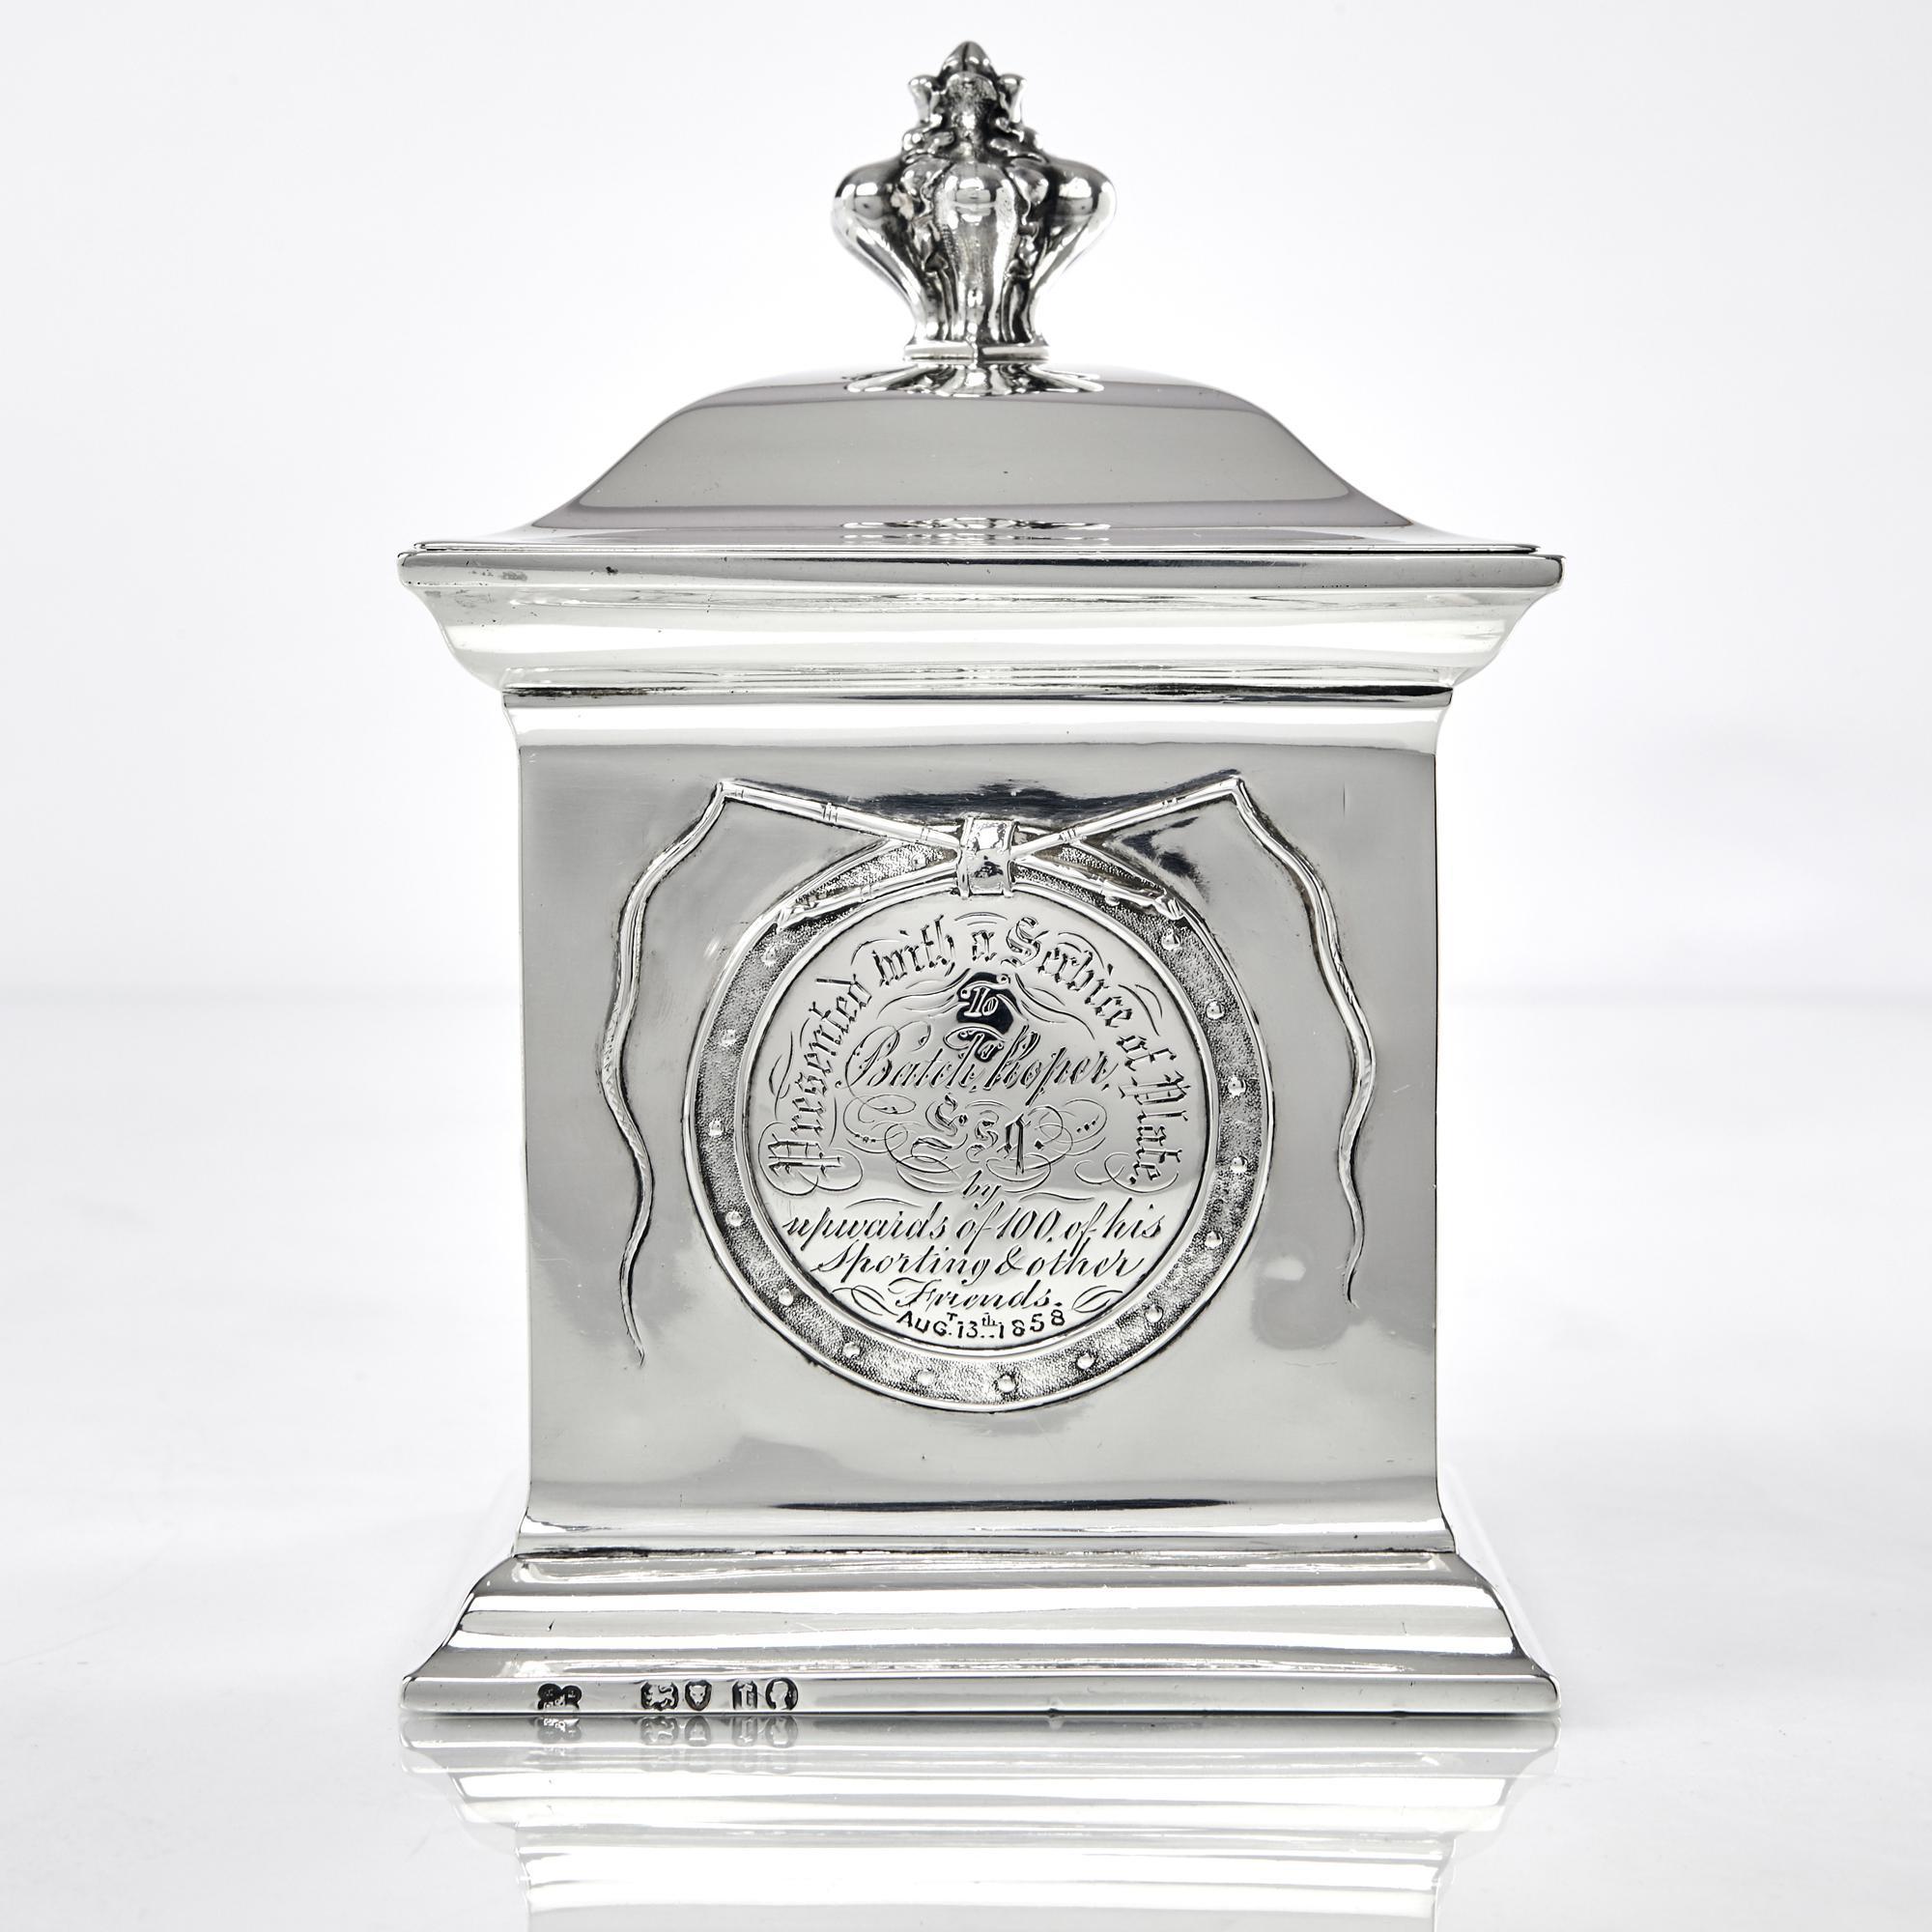 Rare, handmade, Victorian silver tea caddy box with a paneled, lift-off cover and finial featuring stylised oak leaves. Three of the square silver faces are hand chased with images on a fox hunting theme: a sitting fox, a hunting hound and a pair of